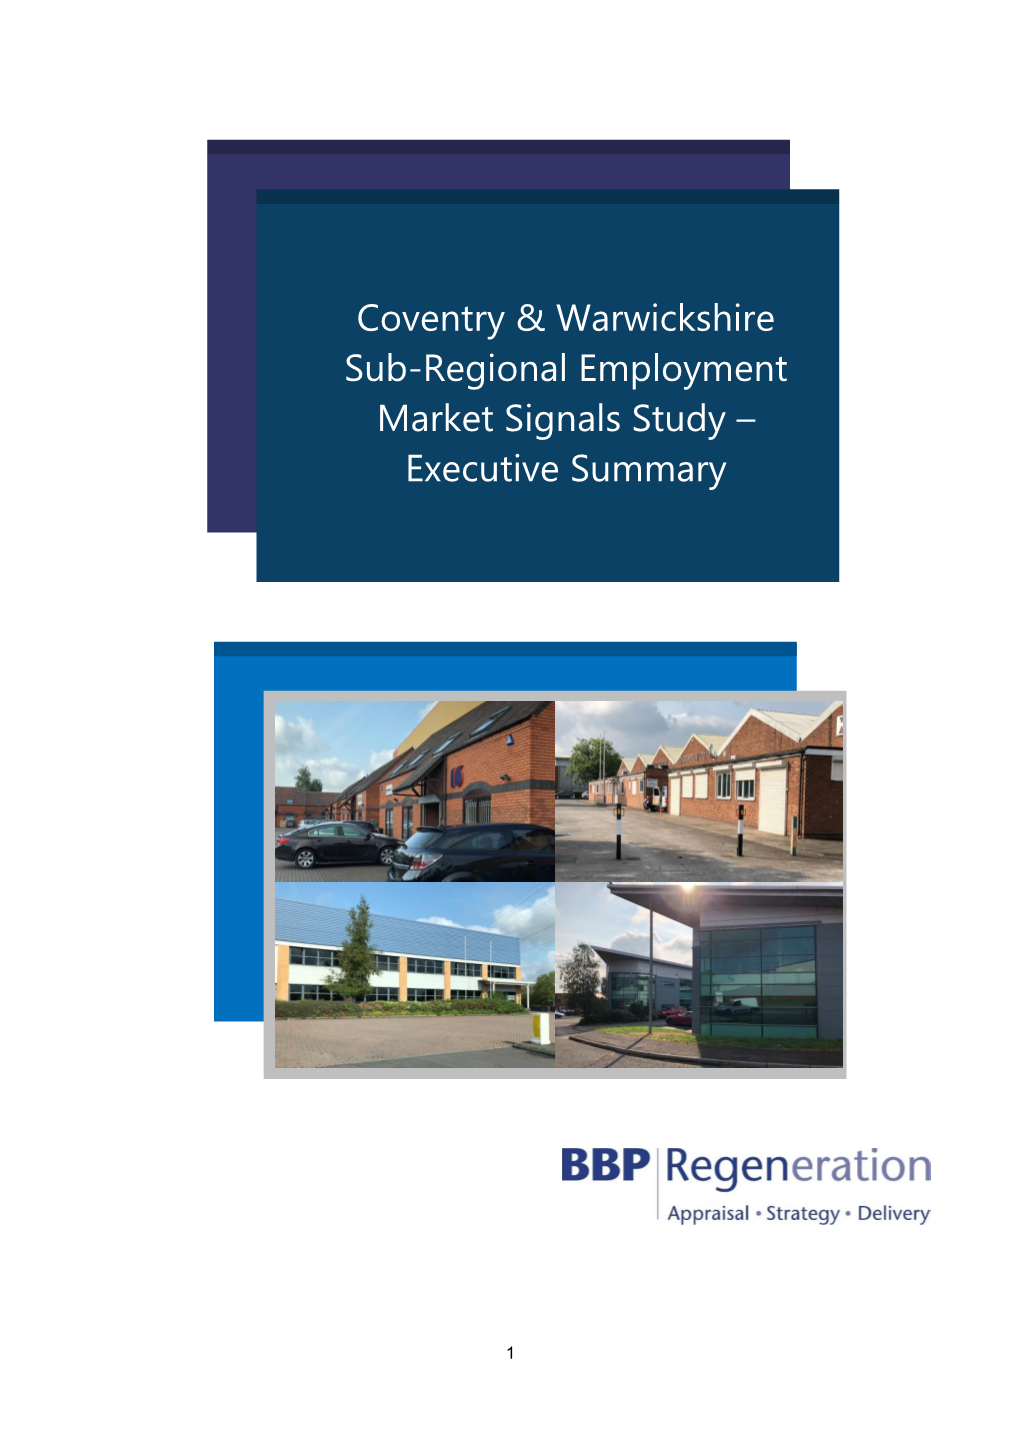 Coventry and Warwickshire Sub-Regional Employment Market Signals Study